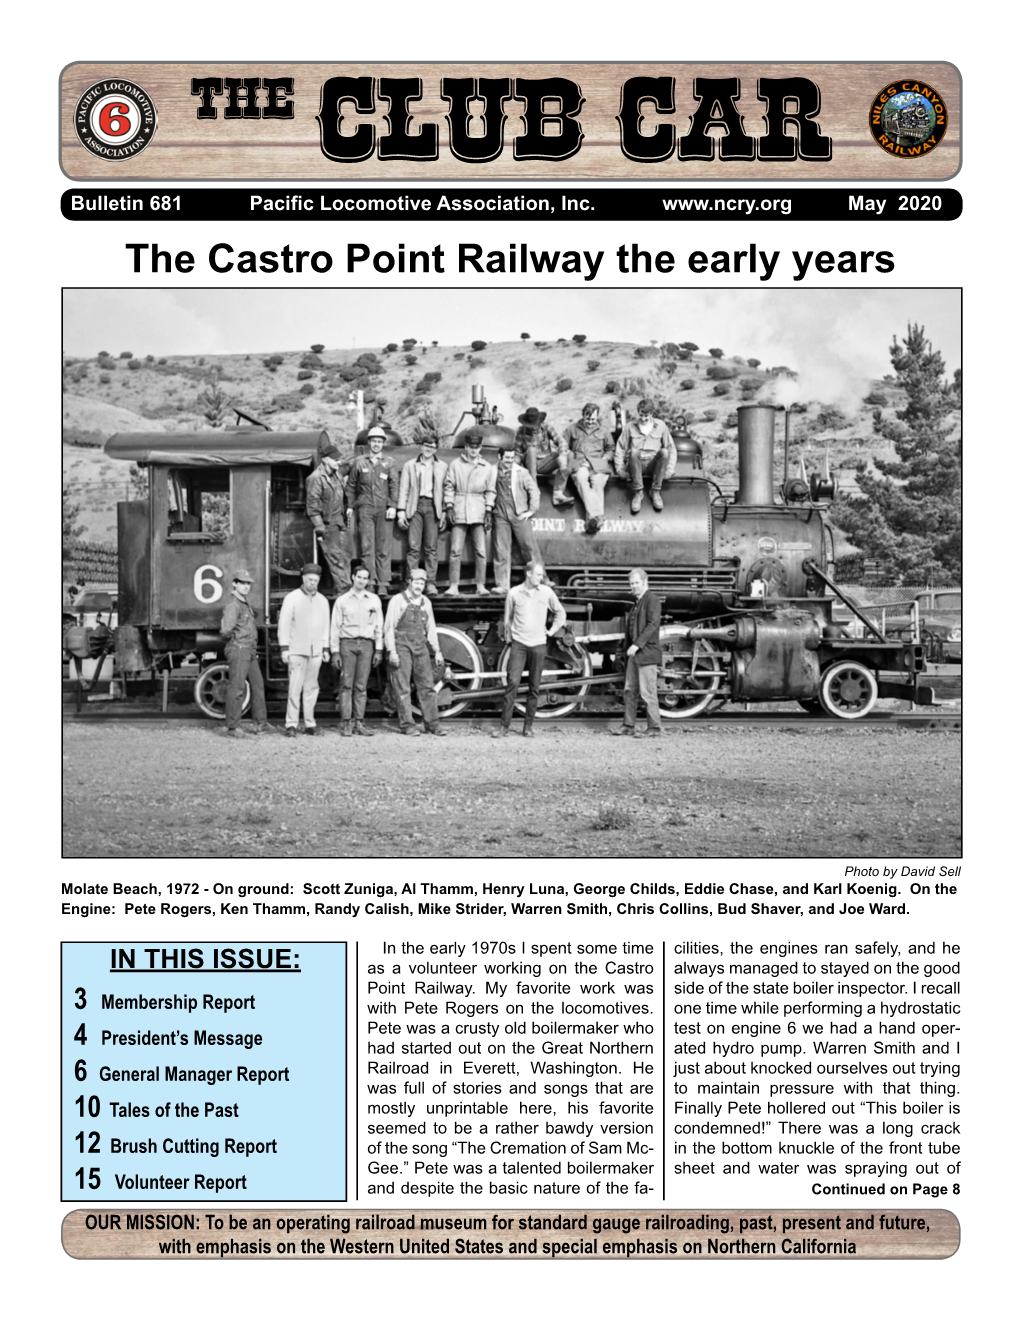 The Castro Point Railway the Early Years